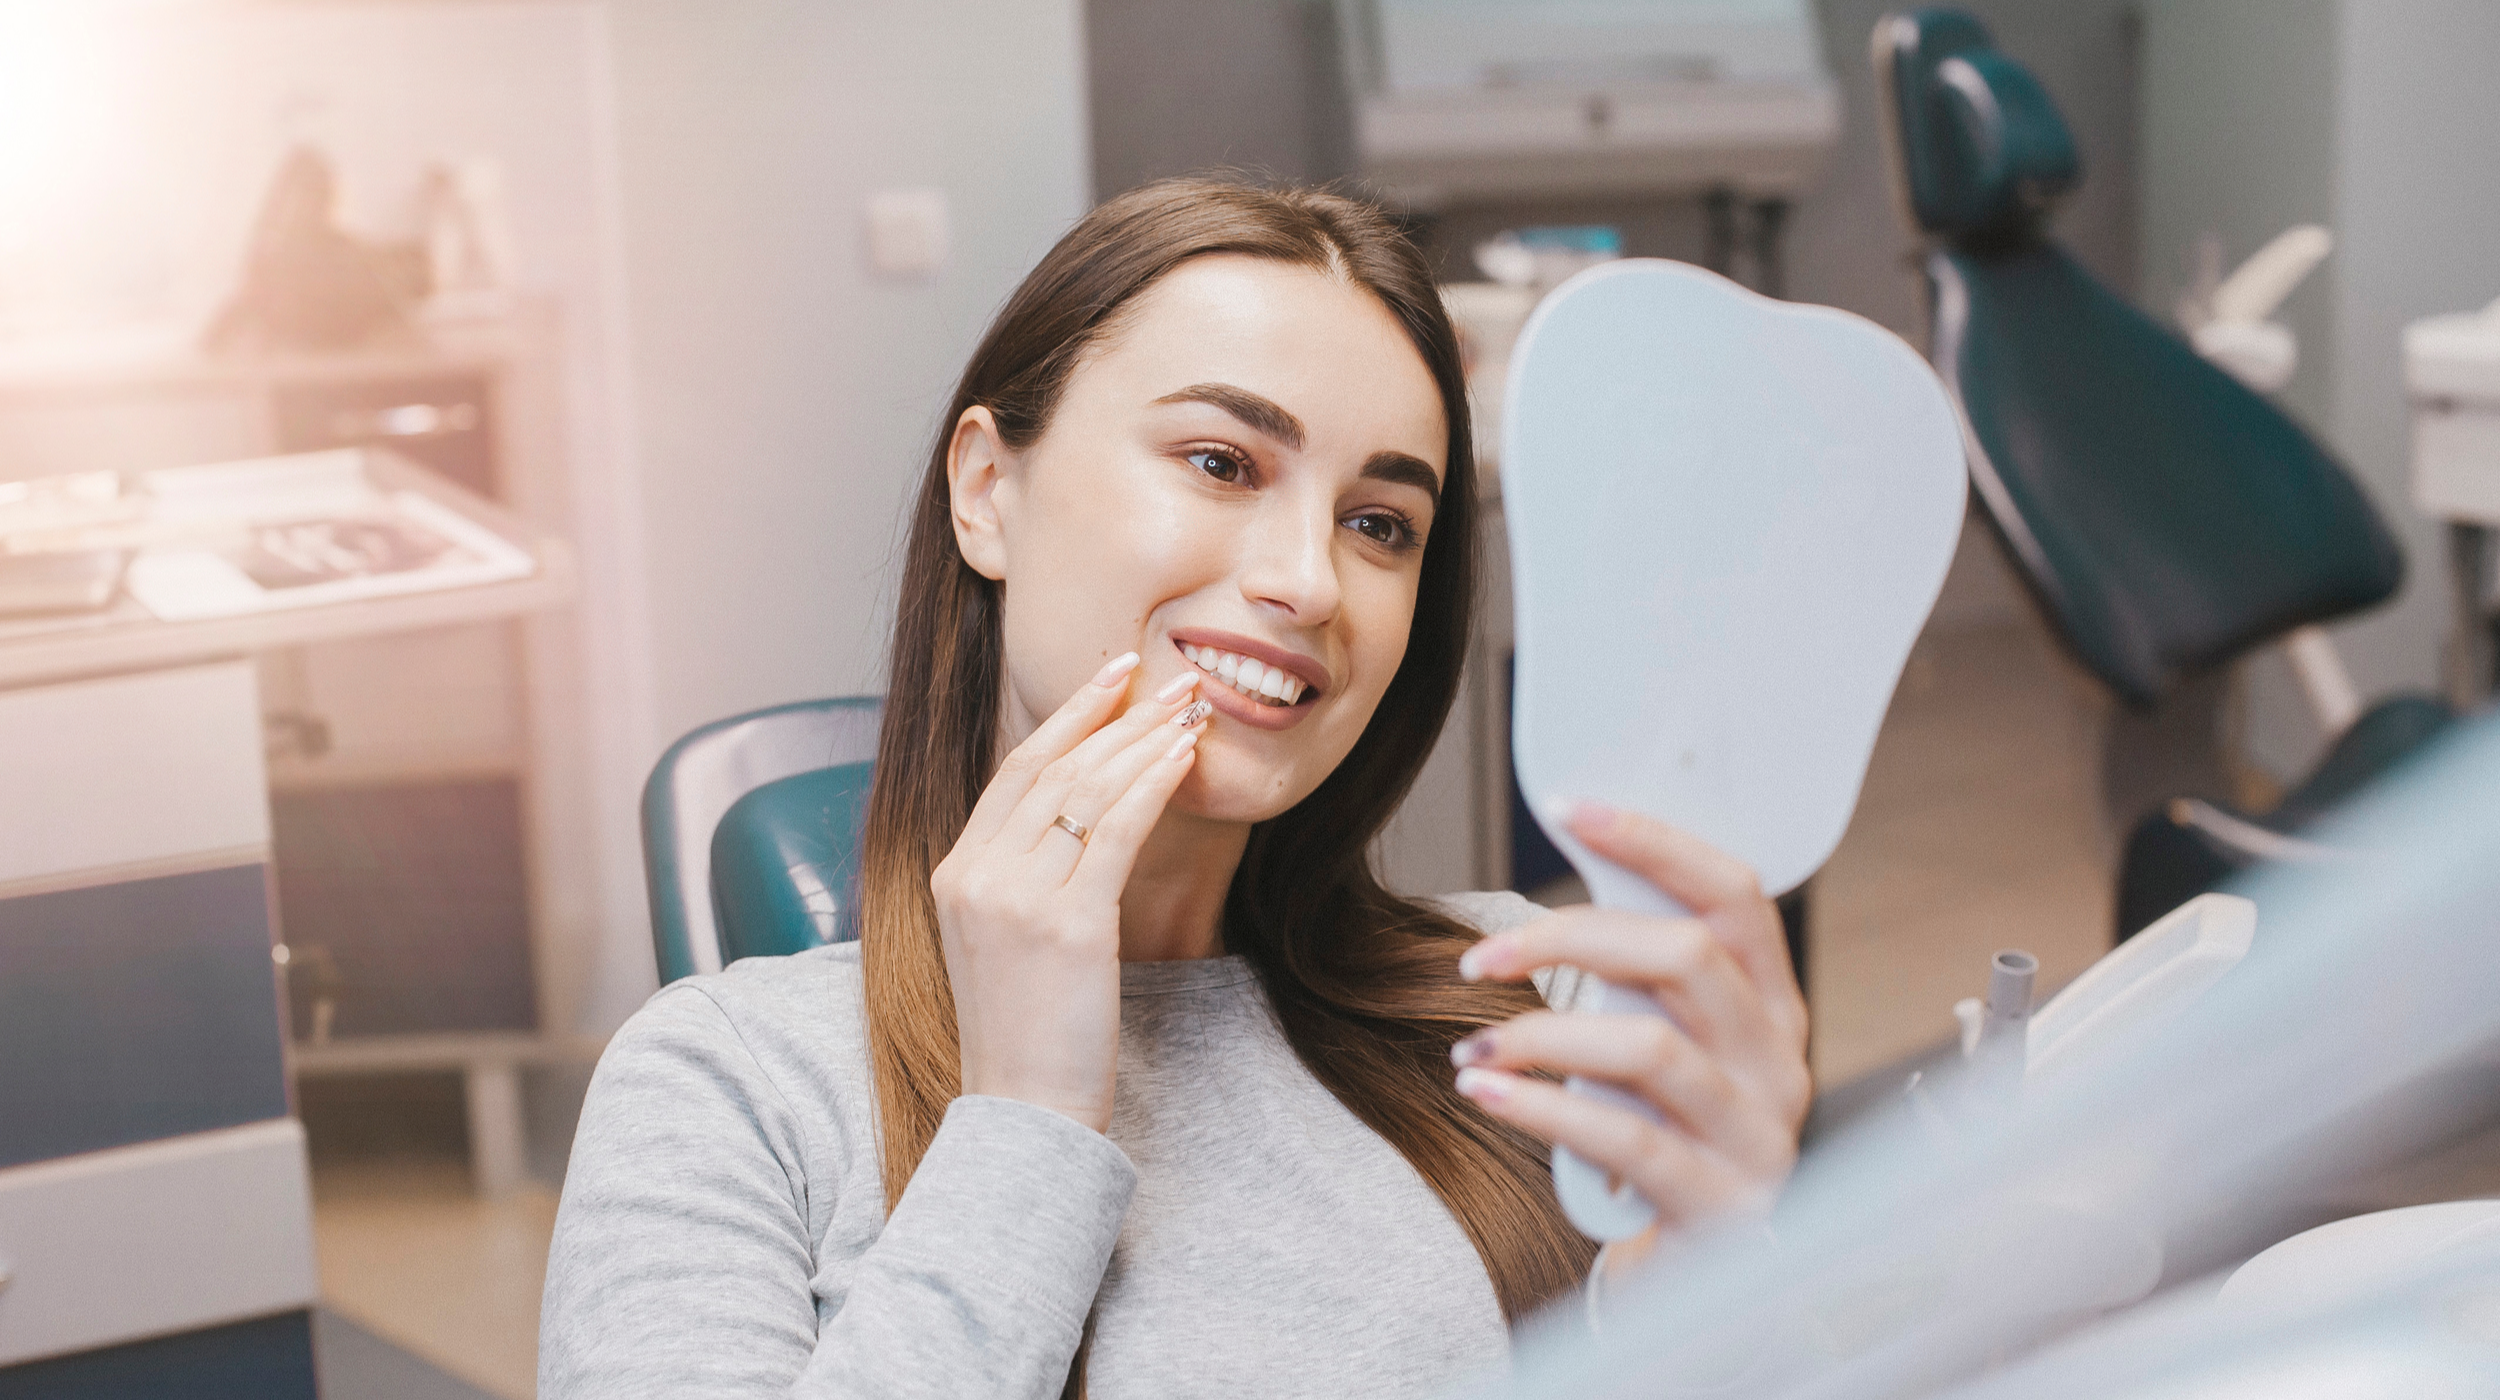 The Benefits of Developing a Positive Relationship with Your Dentist